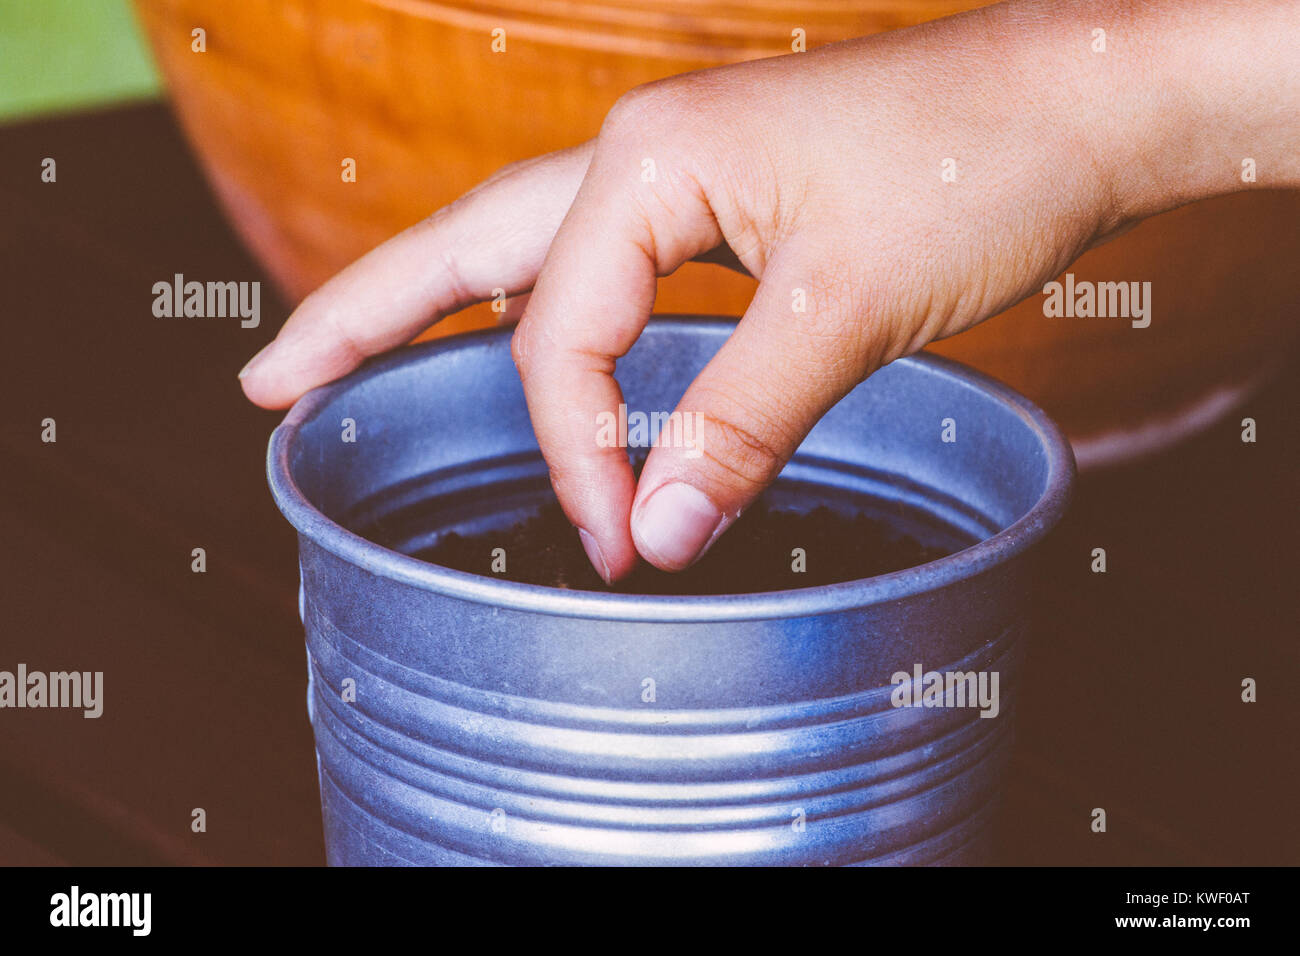 Child hand planting a seed in pot. Stock Photo